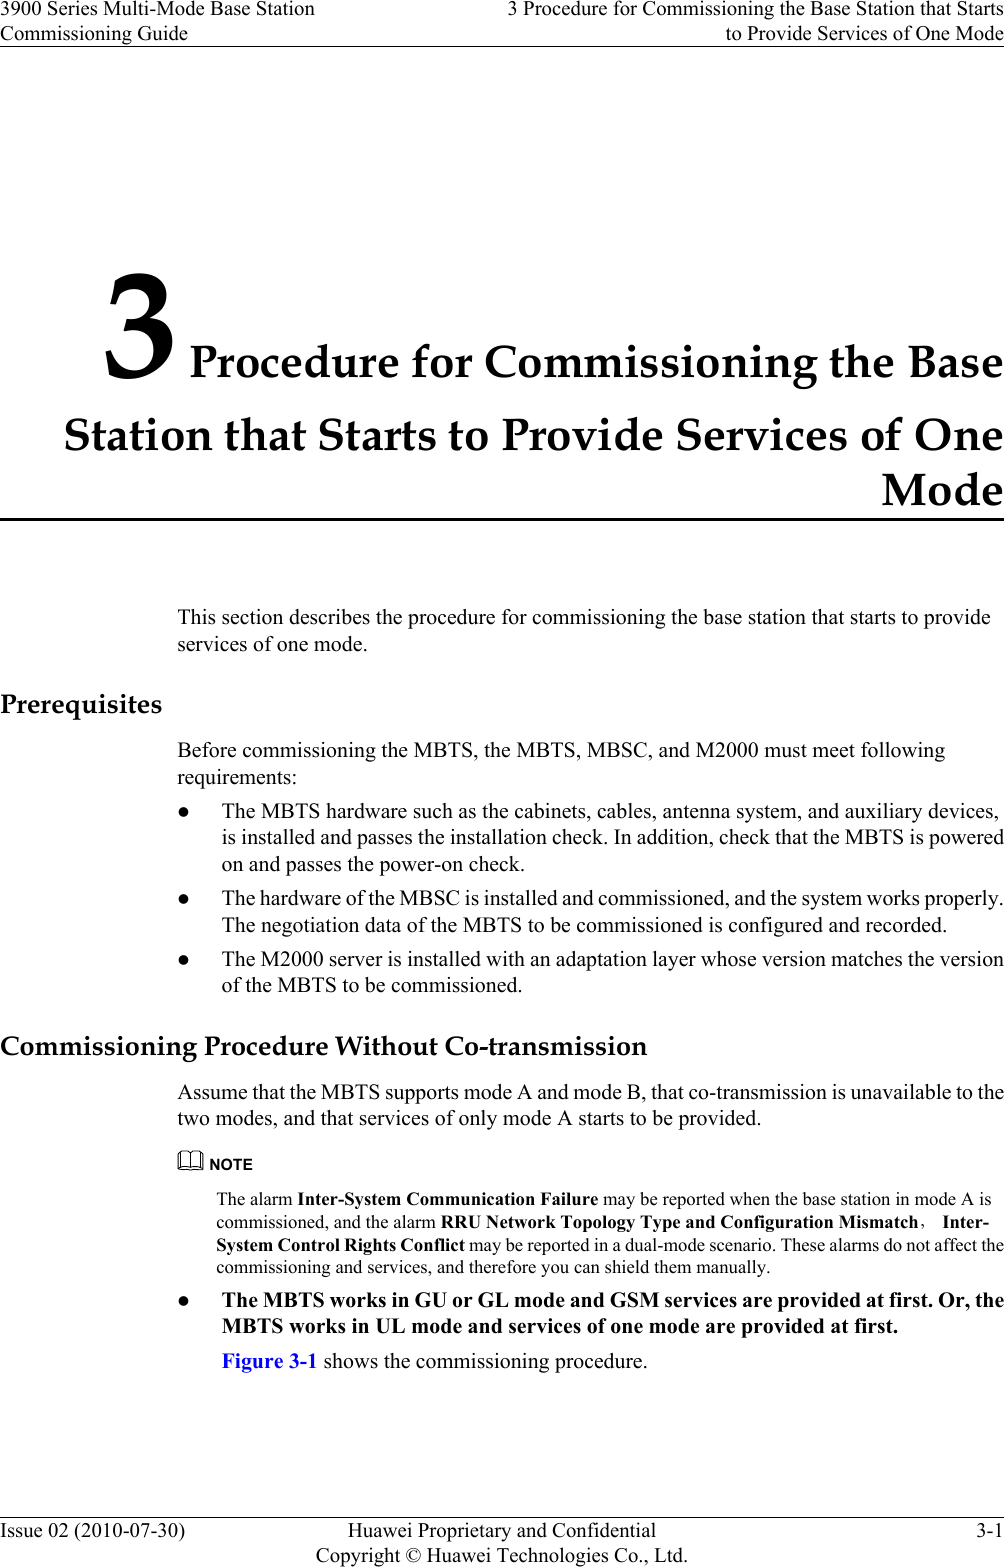 3 Procedure for Commissioning the BaseStation that Starts to Provide Services of OneModeThis section describes the procedure for commissioning the base station that starts to provideservices of one mode.PrerequisitesBefore commissioning the MBTS, the MBTS, MBSC, and M2000 must meet followingrequirements:lThe MBTS hardware such as the cabinets, cables, antenna system, and auxiliary devices,is installed and passes the installation check. In addition, check that the MBTS is poweredon and passes the power-on check.lThe hardware of the MBSC is installed and commissioned, and the system works properly.The negotiation data of the MBTS to be commissioned is configured and recorded.lThe M2000 server is installed with an adaptation layer whose version matches the versionof the MBTS to be commissioned.Commissioning Procedure Without Co-transmissionAssume that the MBTS supports mode A and mode B, that co-transmission is unavailable to thetwo modes, and that services of only mode A starts to be provided.NOTEThe alarm Inter-System Communication Failure may be reported when the base station in mode A iscommissioned, and the alarm RRU Network Topology Type and Configuration Mismatch， Inter-System Control Rights Conflict may be reported in a dual-mode scenario. These alarms do not affect thecommissioning and services, and therefore you can shield them manually.lThe MBTS works in GU or GL mode and GSM services are provided at first. Or, theMBTS works in UL mode and services of one mode are provided at first.Figure 3-1 shows the commissioning procedure.3900 Series Multi-Mode Base StationCommissioning Guide3 Procedure for Commissioning the Base Station that Startsto Provide Services of One ModeIssue 02 (2010-07-30) Huawei Proprietary and ConfidentialCopyright © Huawei Technologies Co., Ltd.3-1